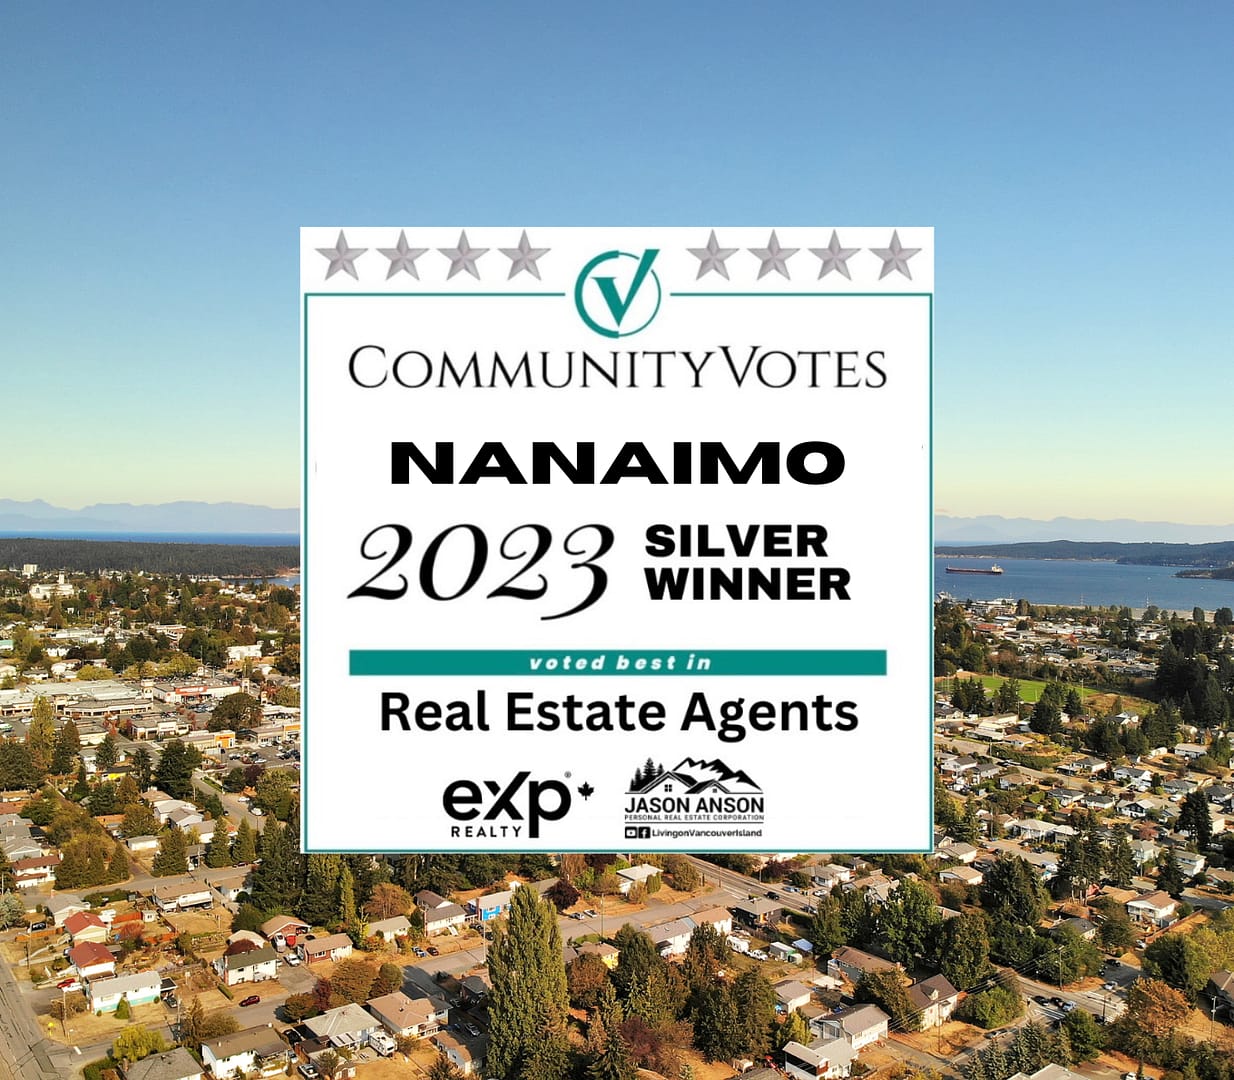 Nanaimo Votes Best Real Estate Agent